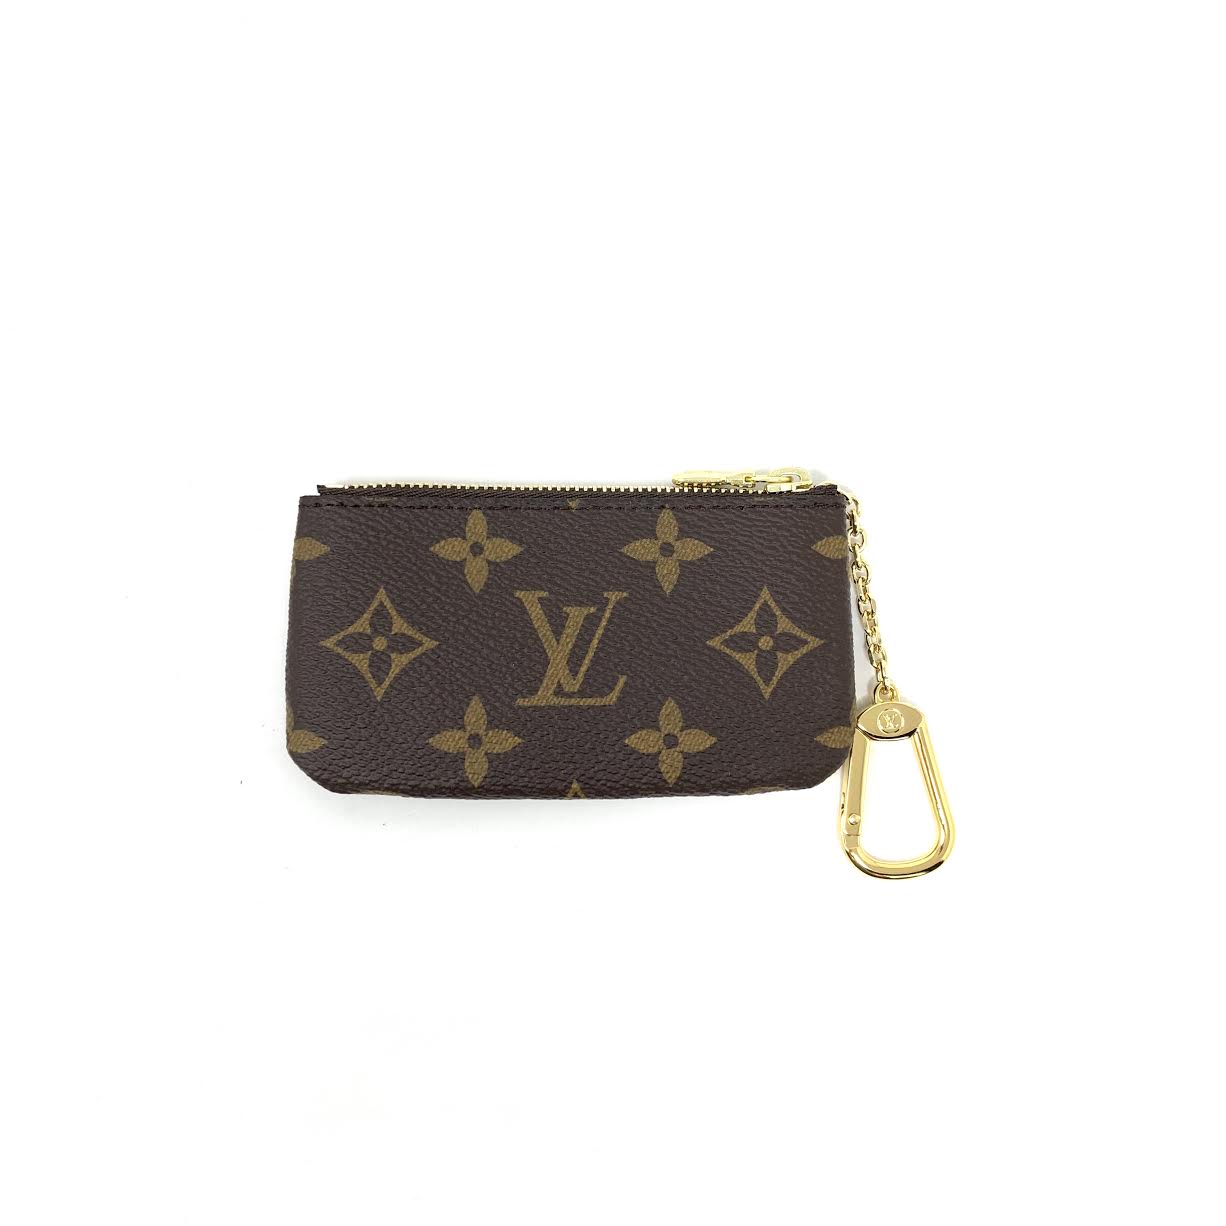 Authenticate This LOUIS VUITTON, Page 85